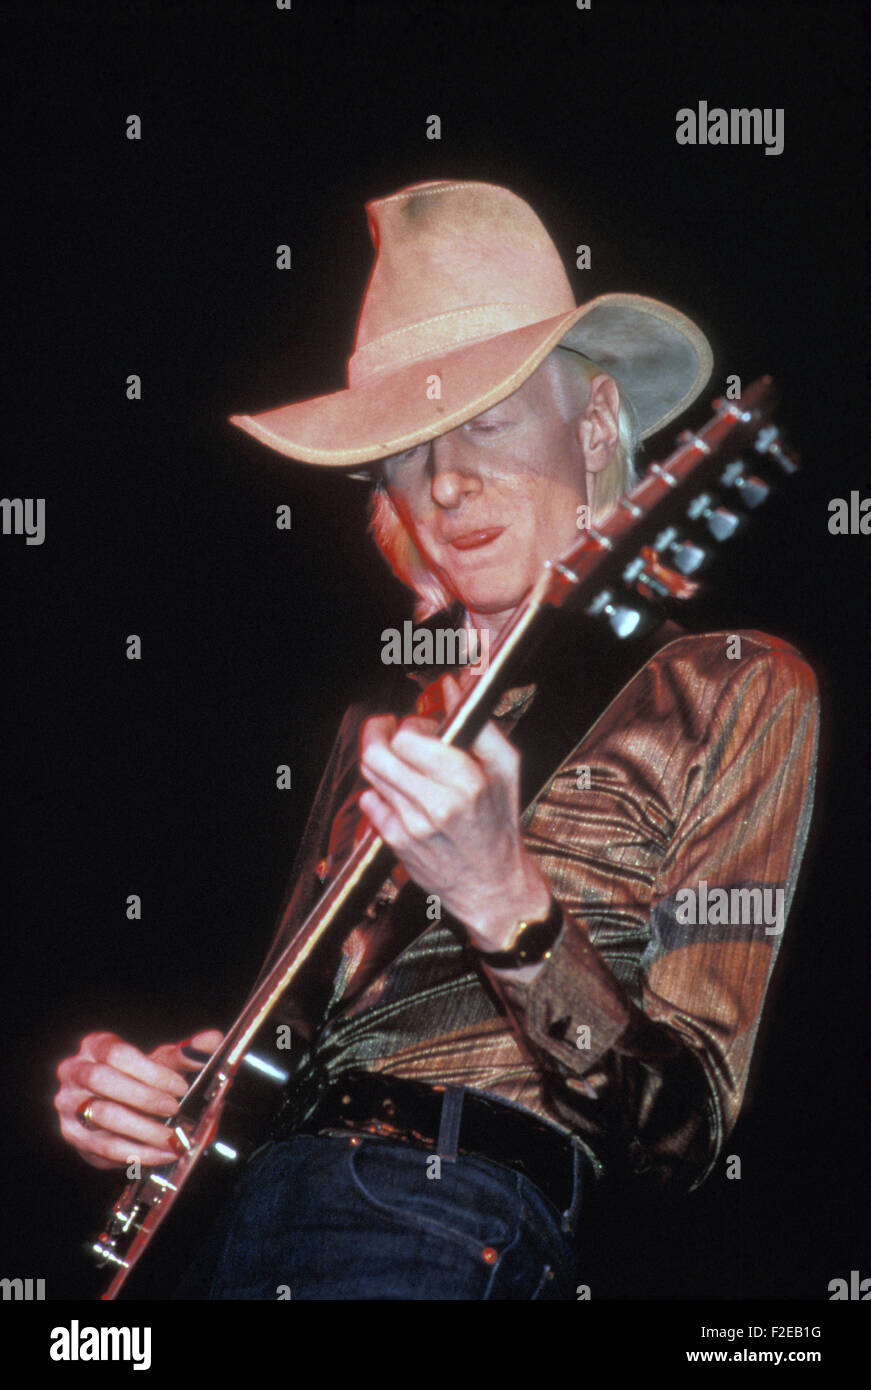 JOHNNY WINTER (1944-2014) US rock musician in 1985. Photo StarFile/Lee Stock Photo